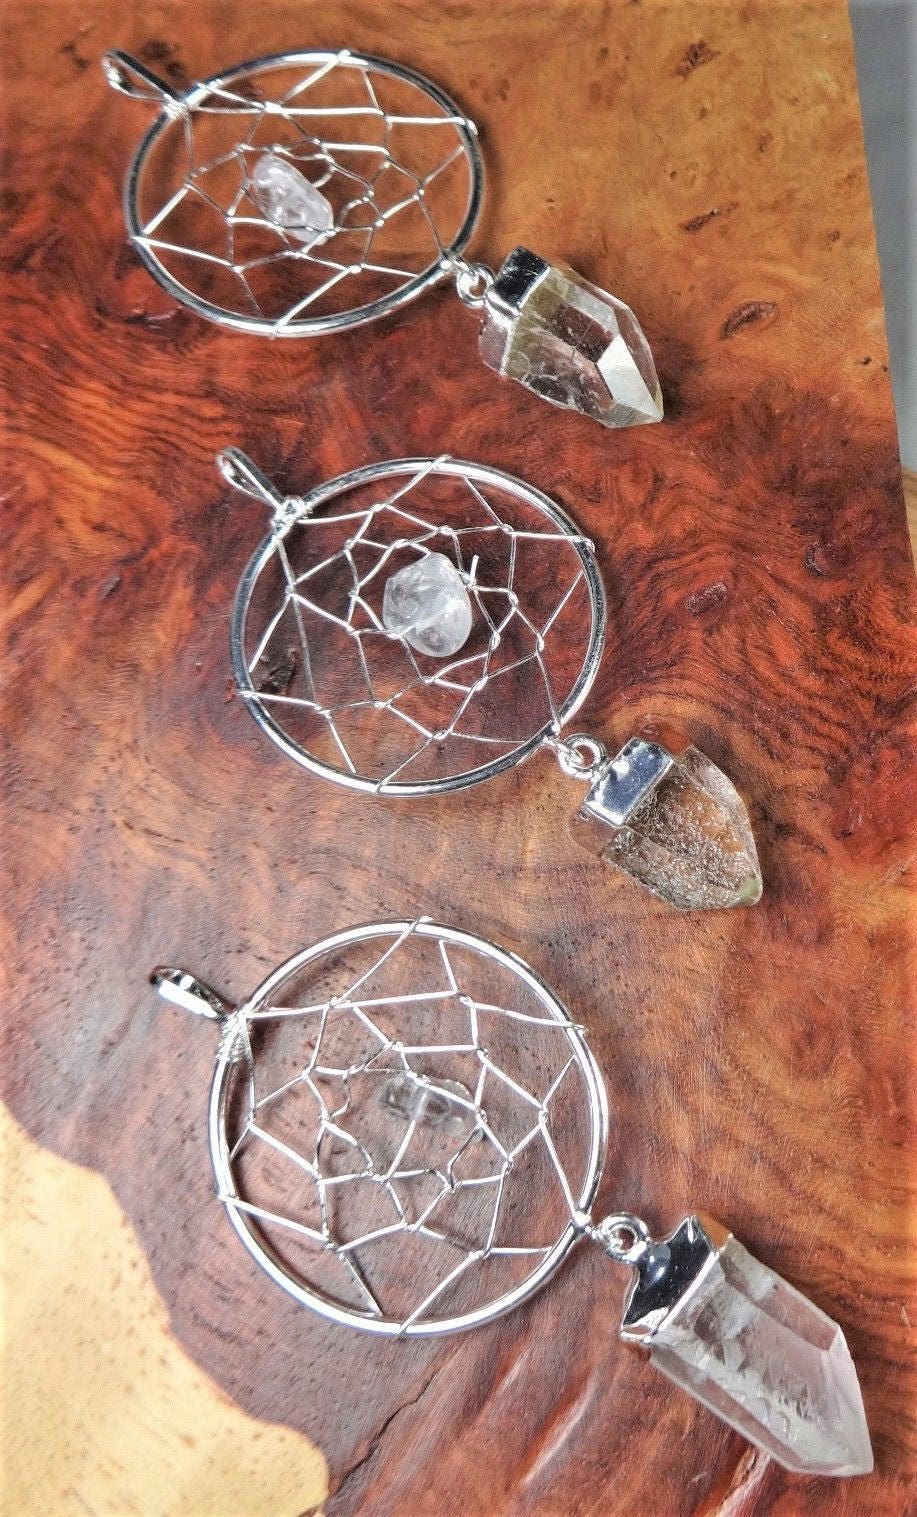 Dreamcatcher Pendant Quartz Crystal Point Silver Plated Necklace Charm Healing Crystals and Stones Jewelry